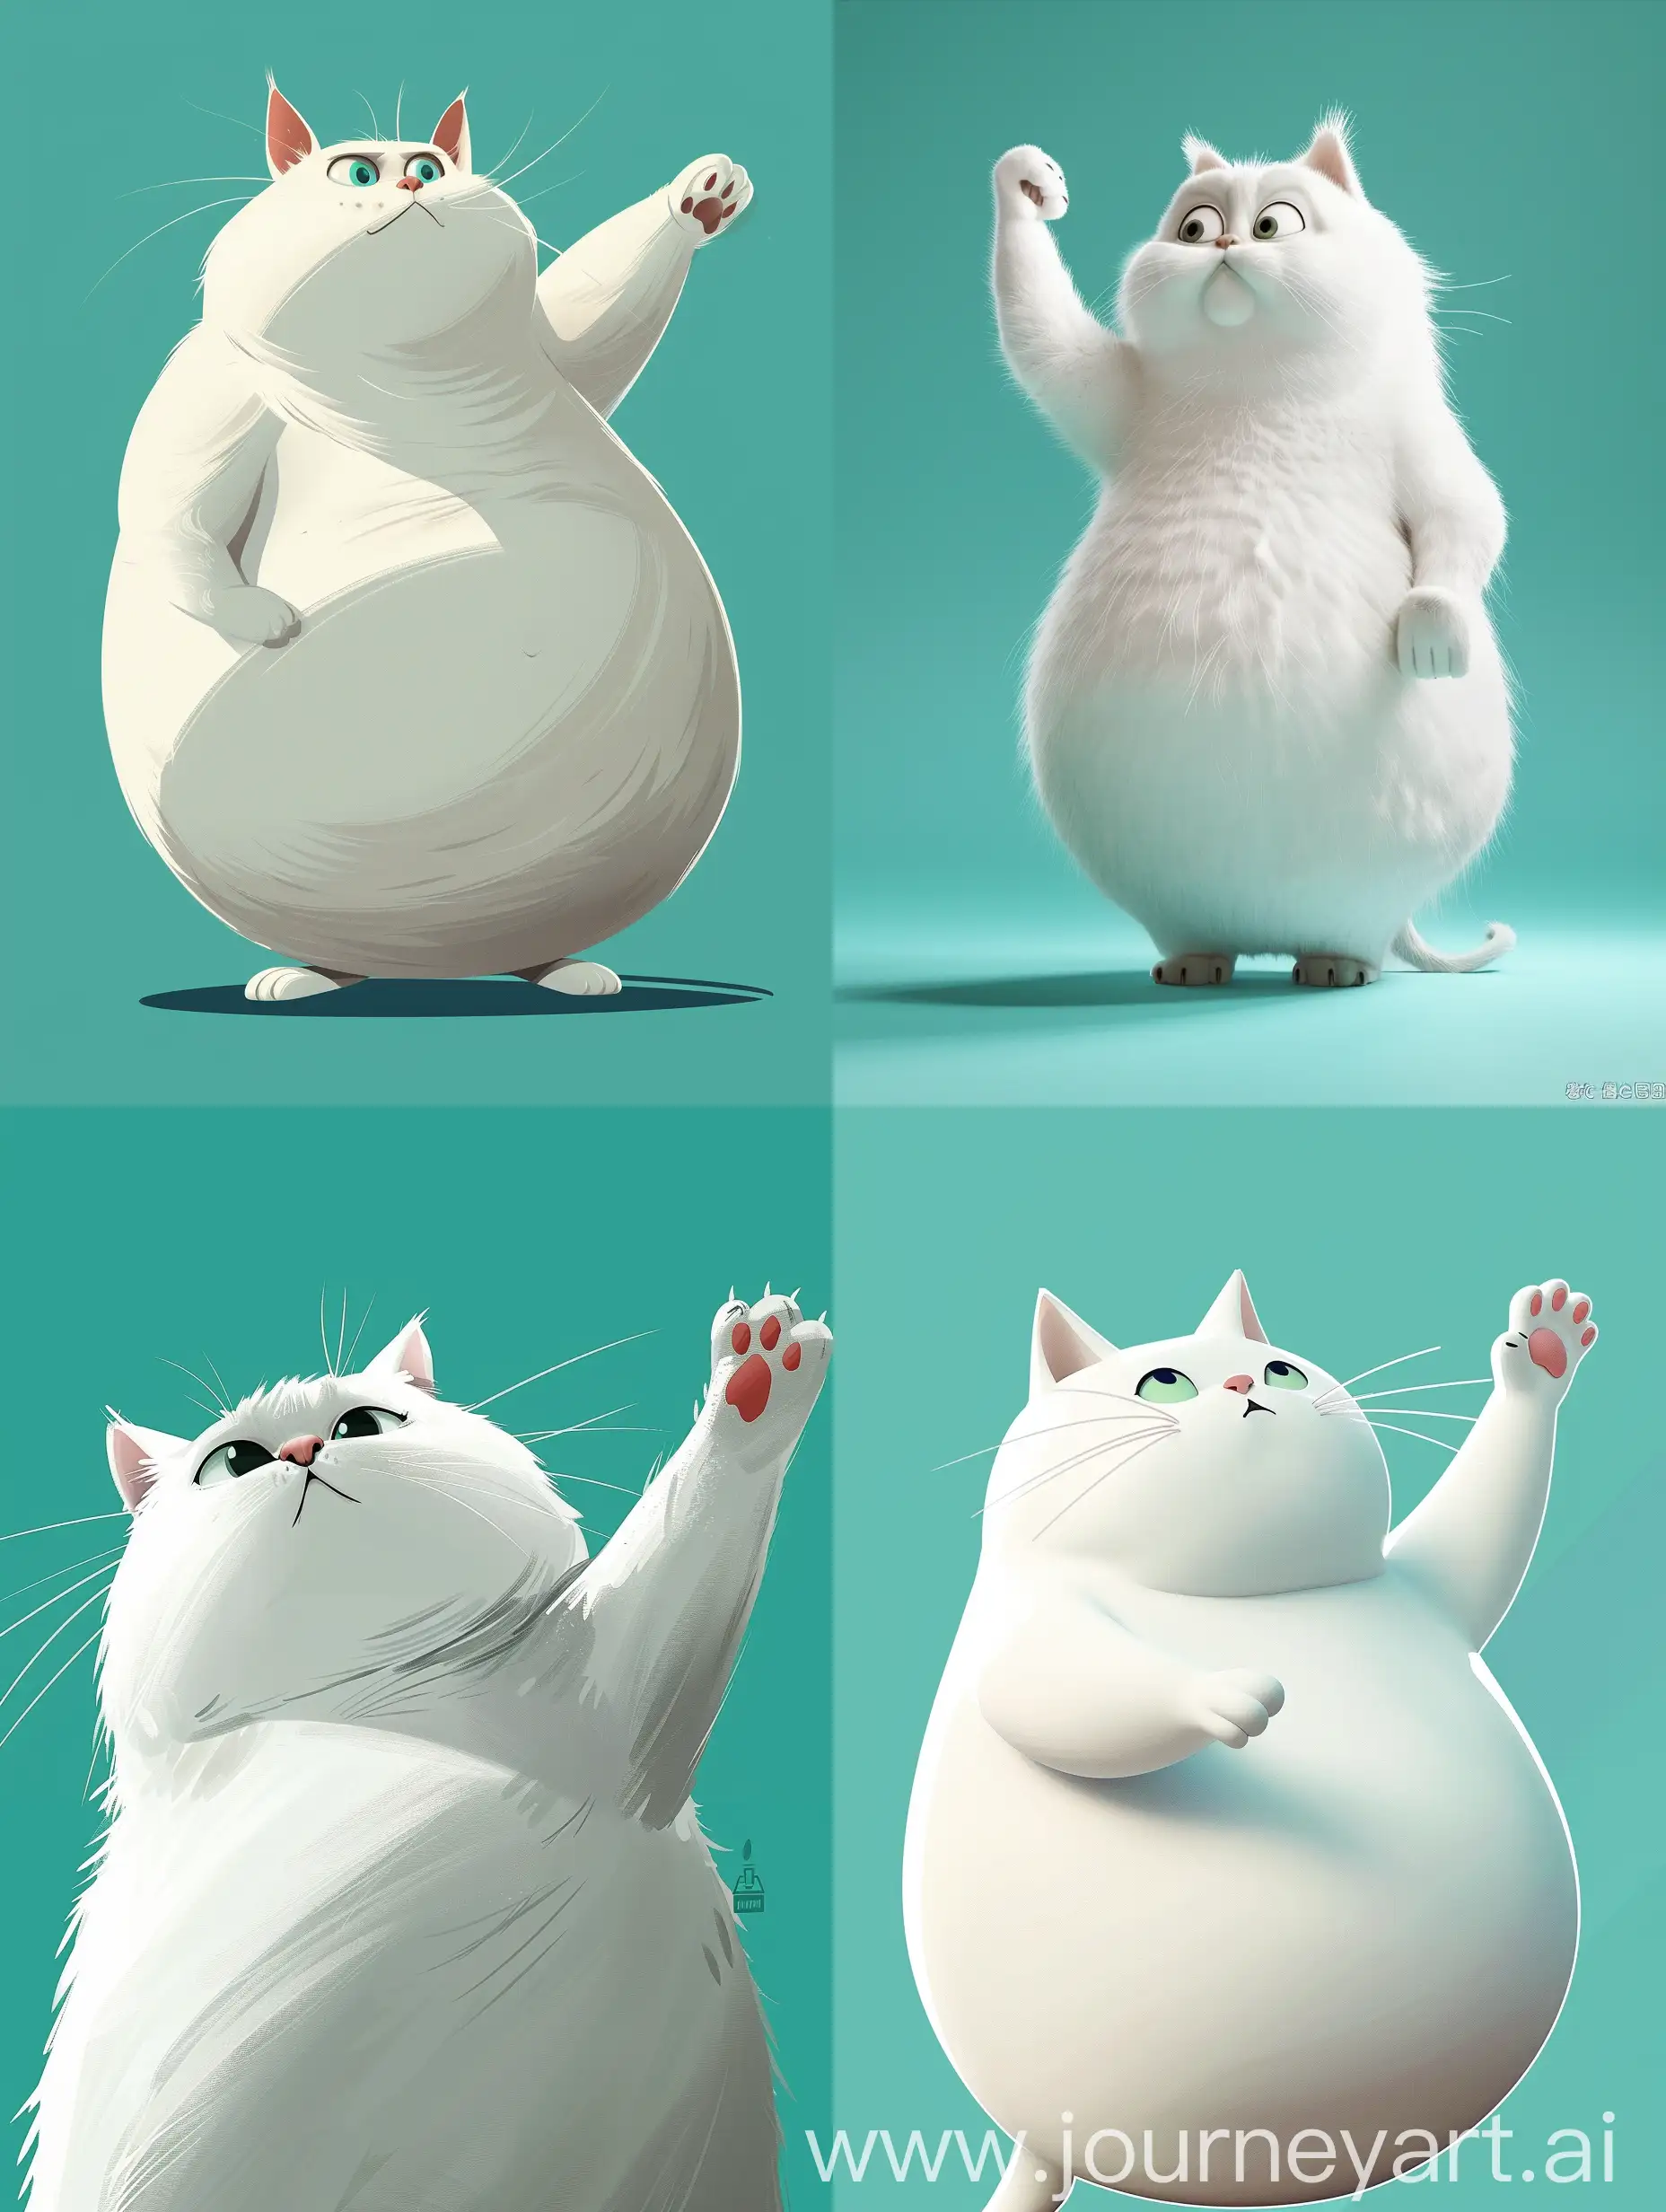 Charming-PixarStyle-Fat-White-Cat-Poses-Playfully